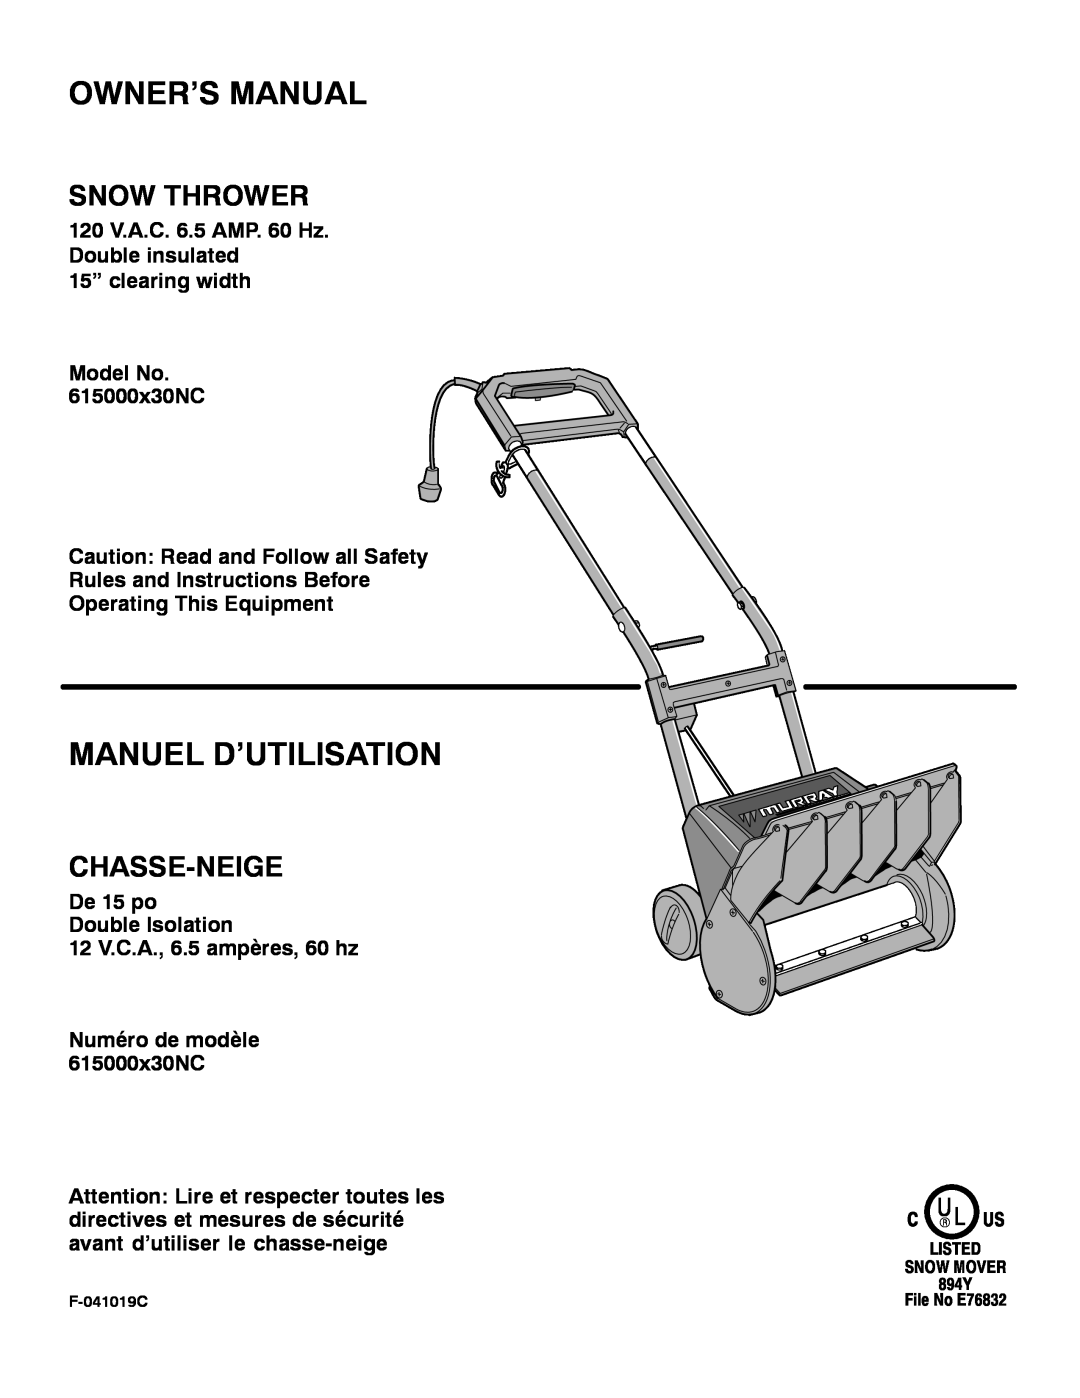 Murray 615000x30NC owner manual Manuel D’Utilisation, Snow Thrower, Chasse-Neige 